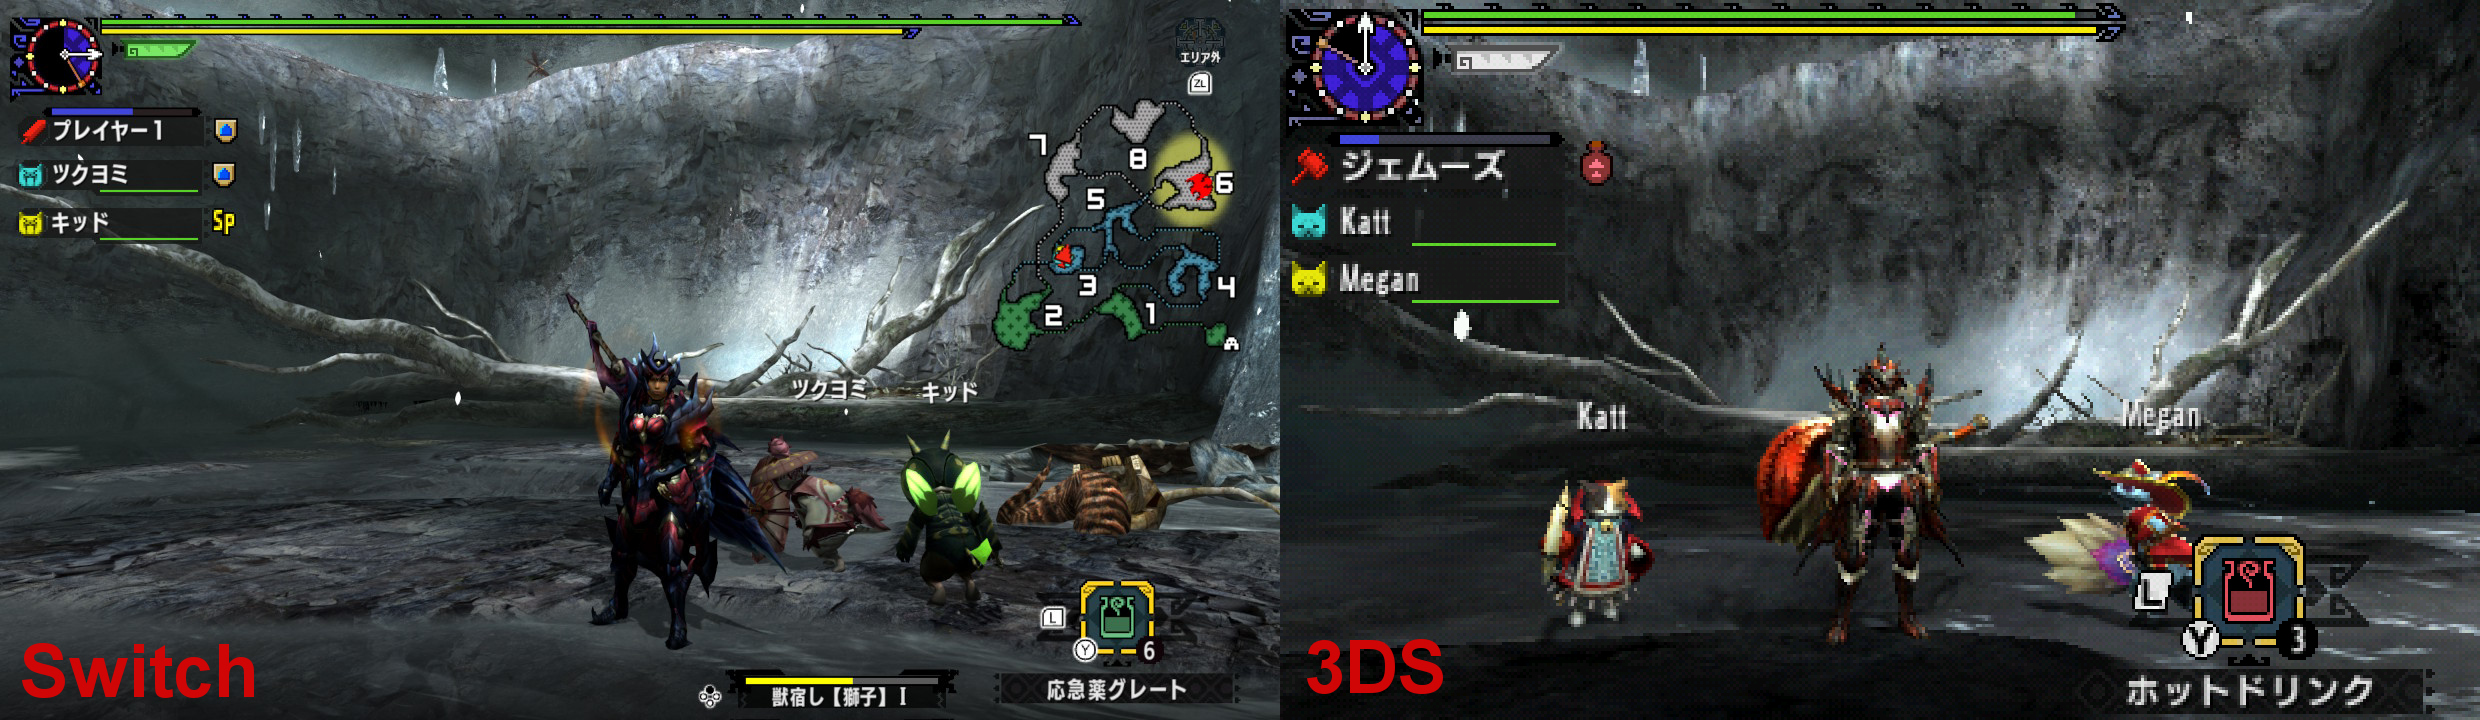 Monster Hunter Generations Key Quests Multiplayer